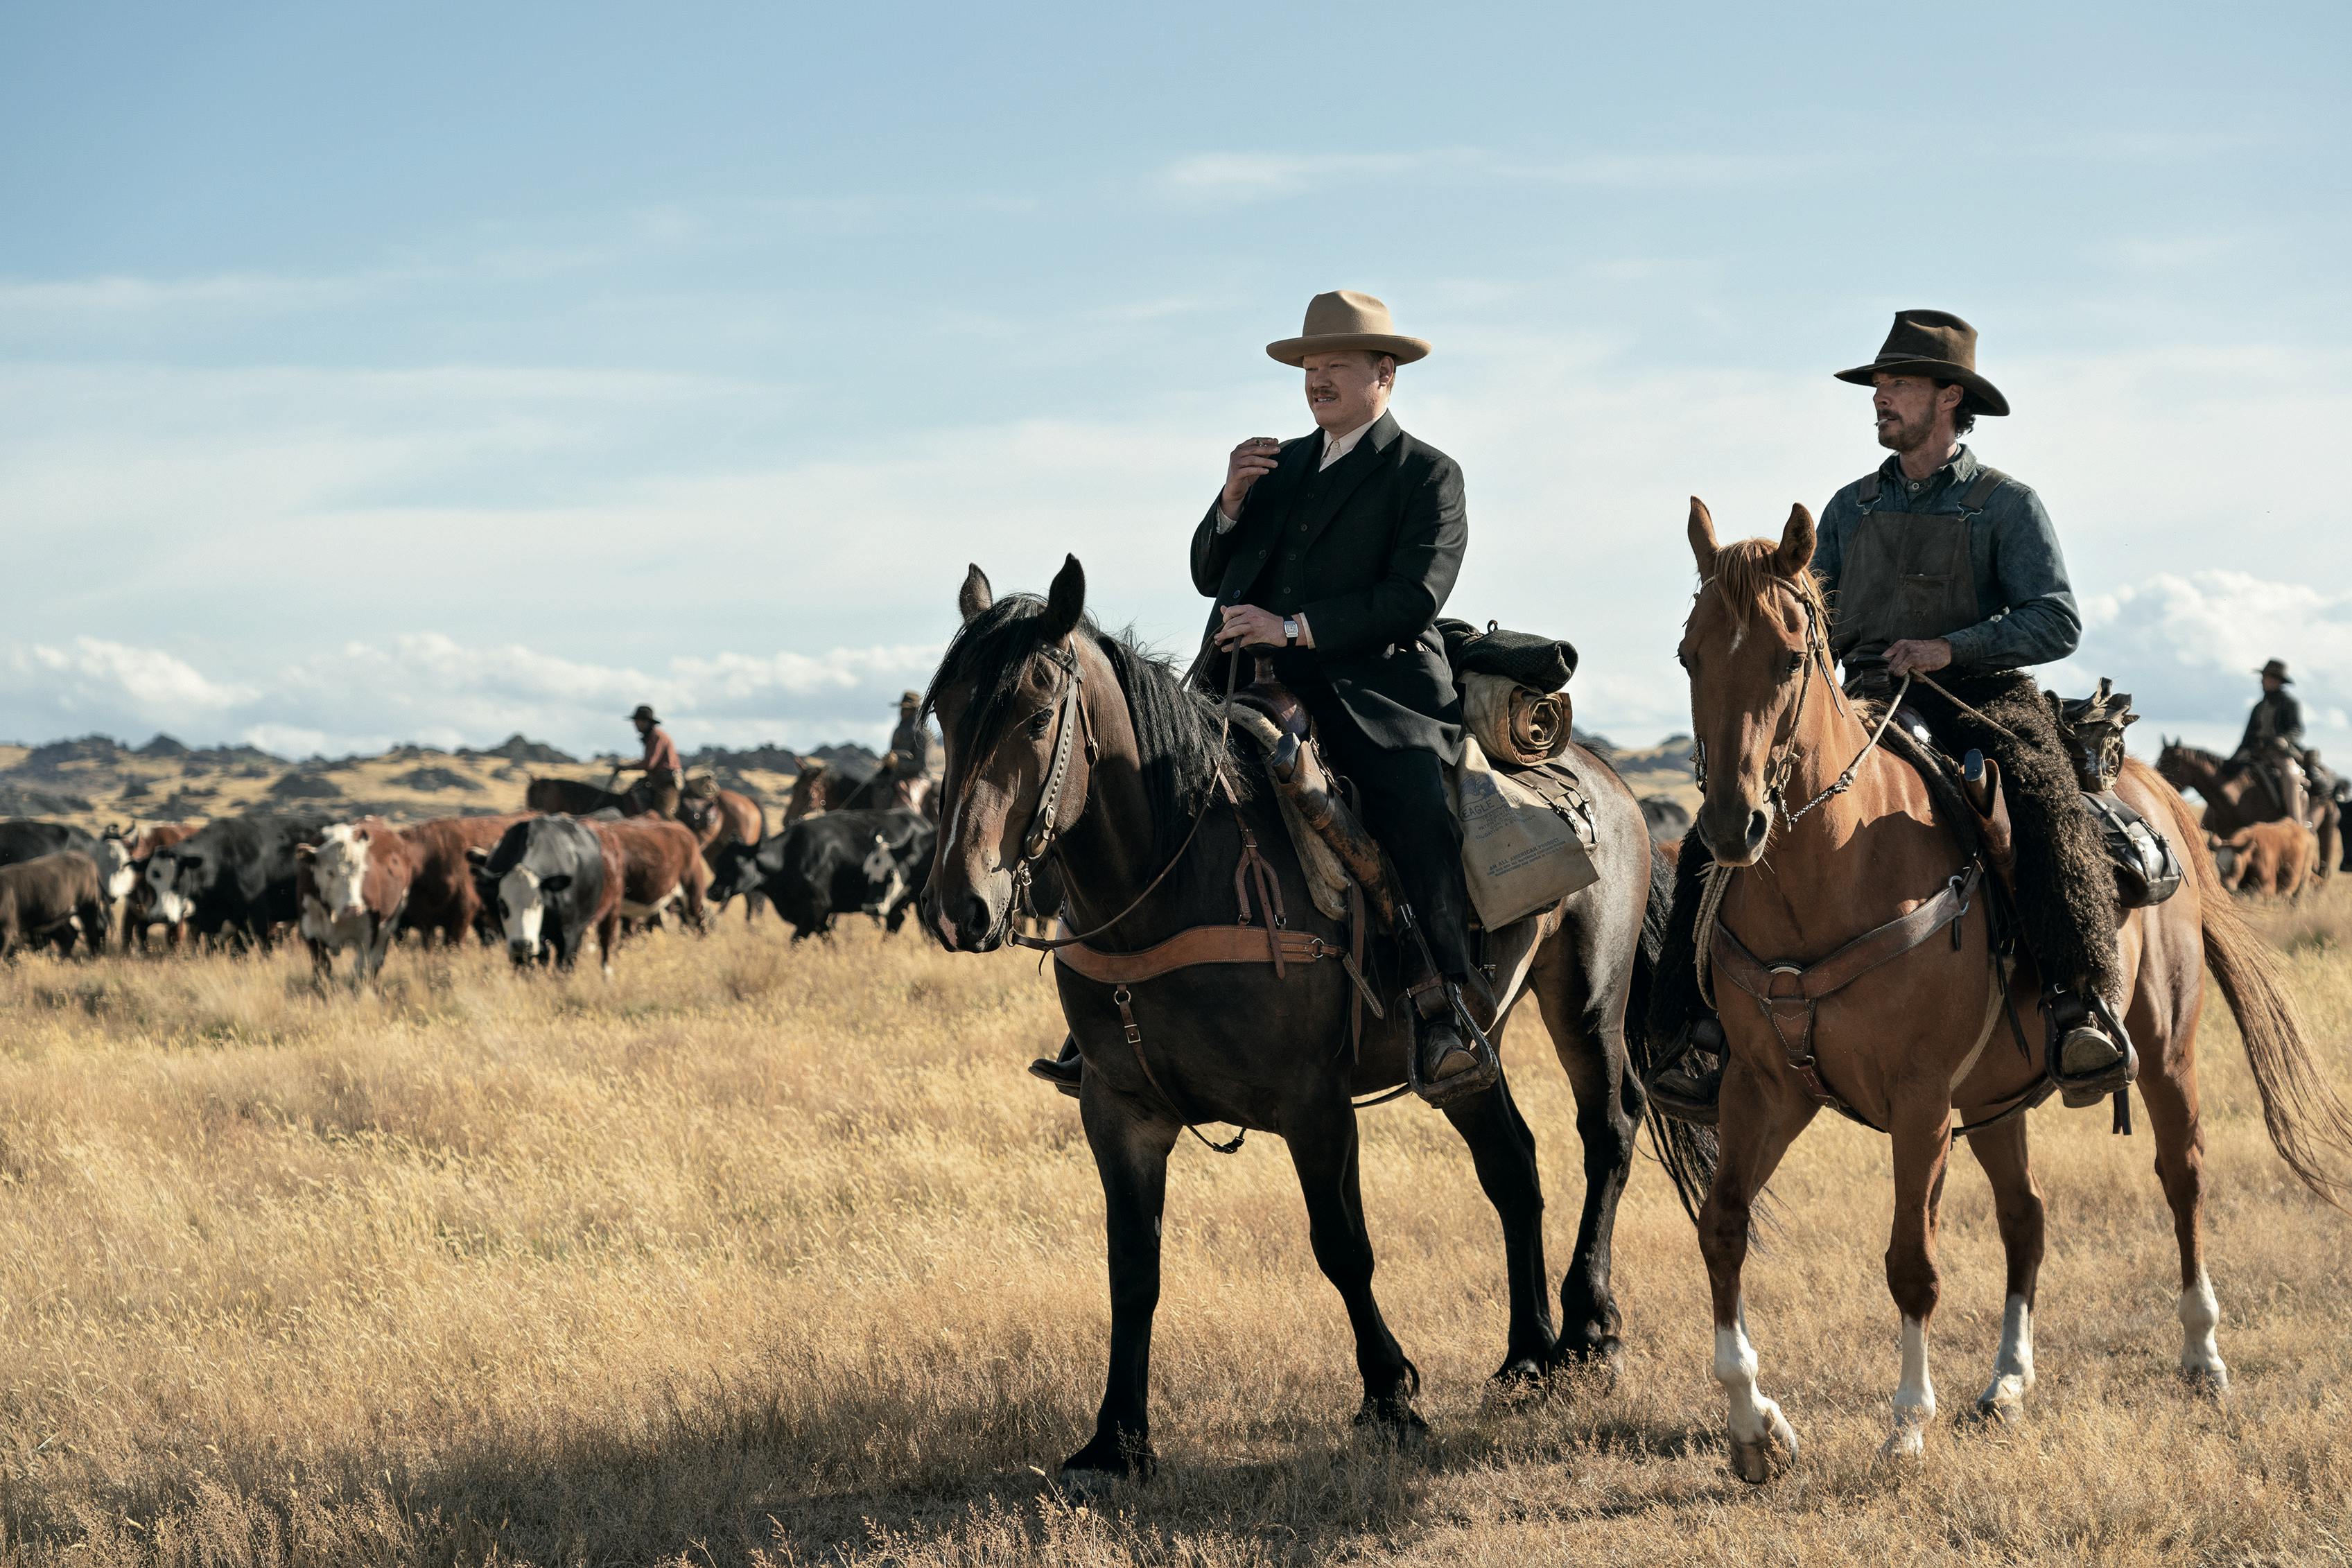 Jesse Plemons and Benedict Cumberbatch ride horses through a dry field. Behind them are tens of other horses.